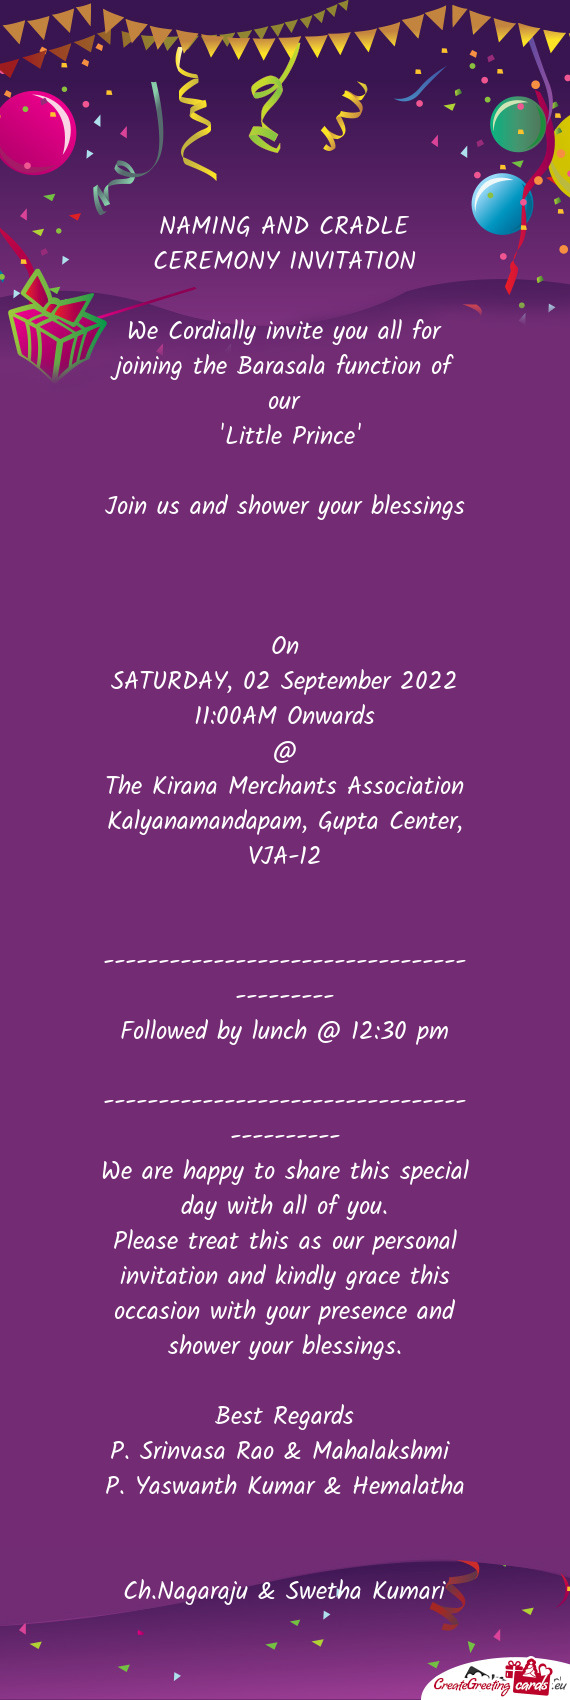 We Cordially invite you all for joining the Barasala function of our